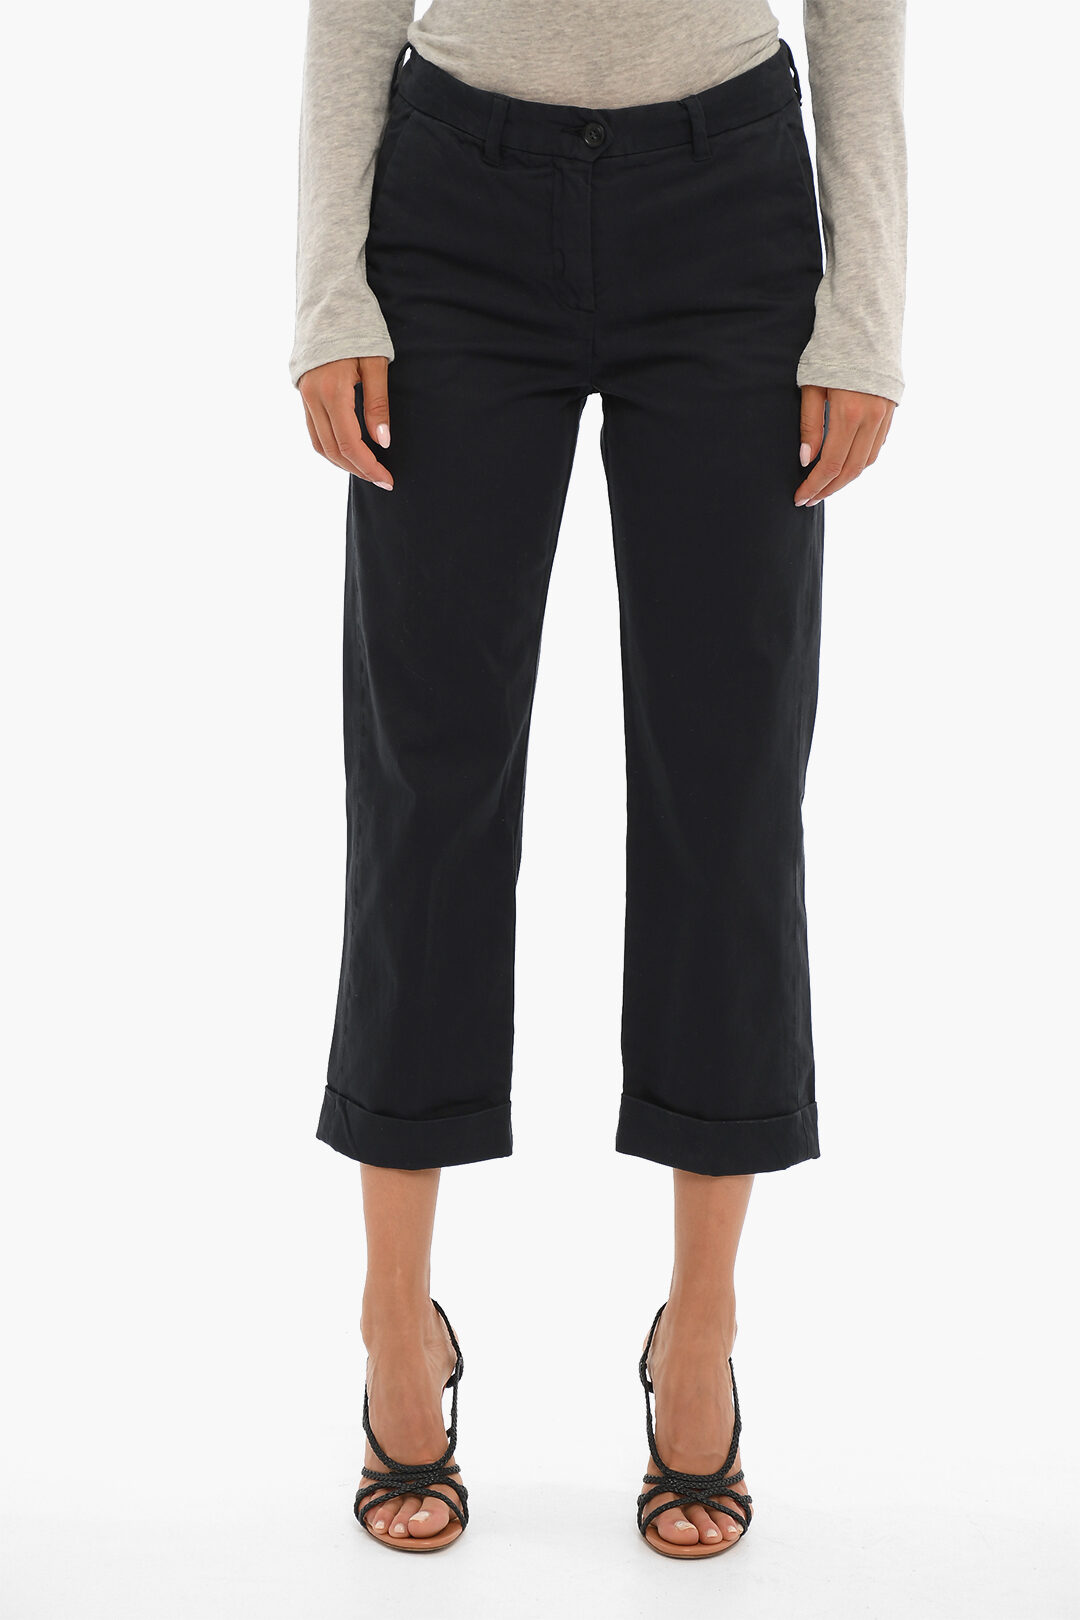 Woolrich Cotton Stretch AMERICAN Pants with Belt Loops women